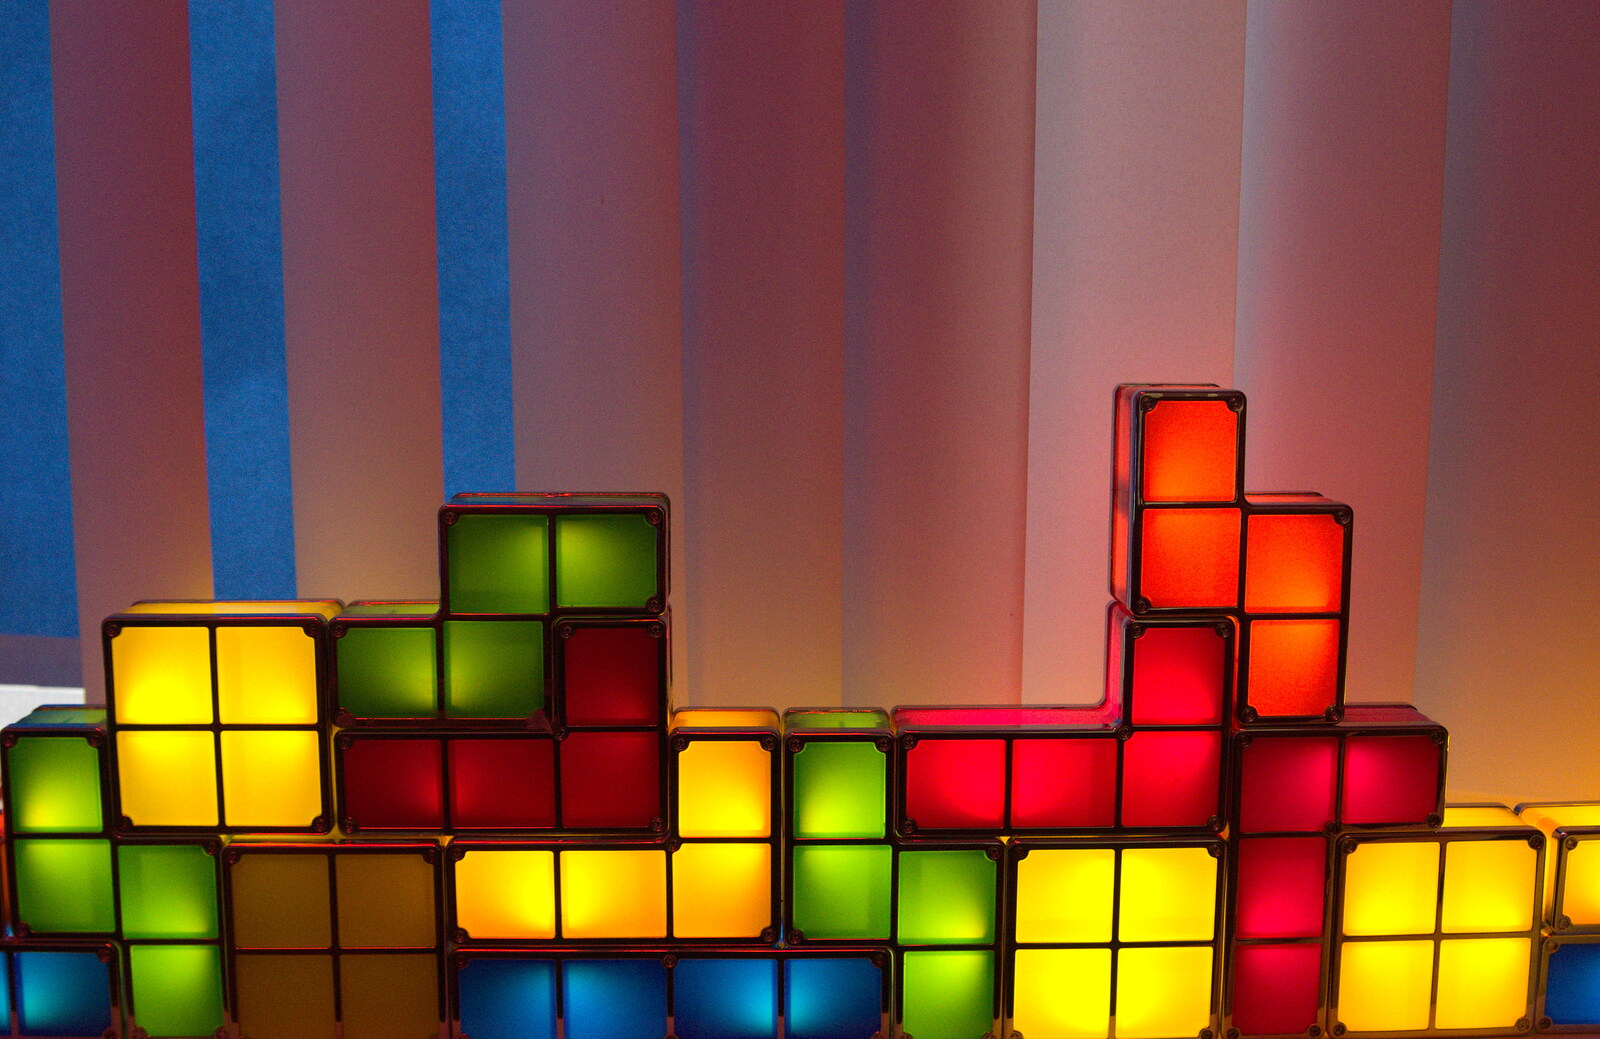 There are some cool Tetris-like lights from SwiftKey Innovation Week, Southwark Bridge Road, London - 7th October 2015